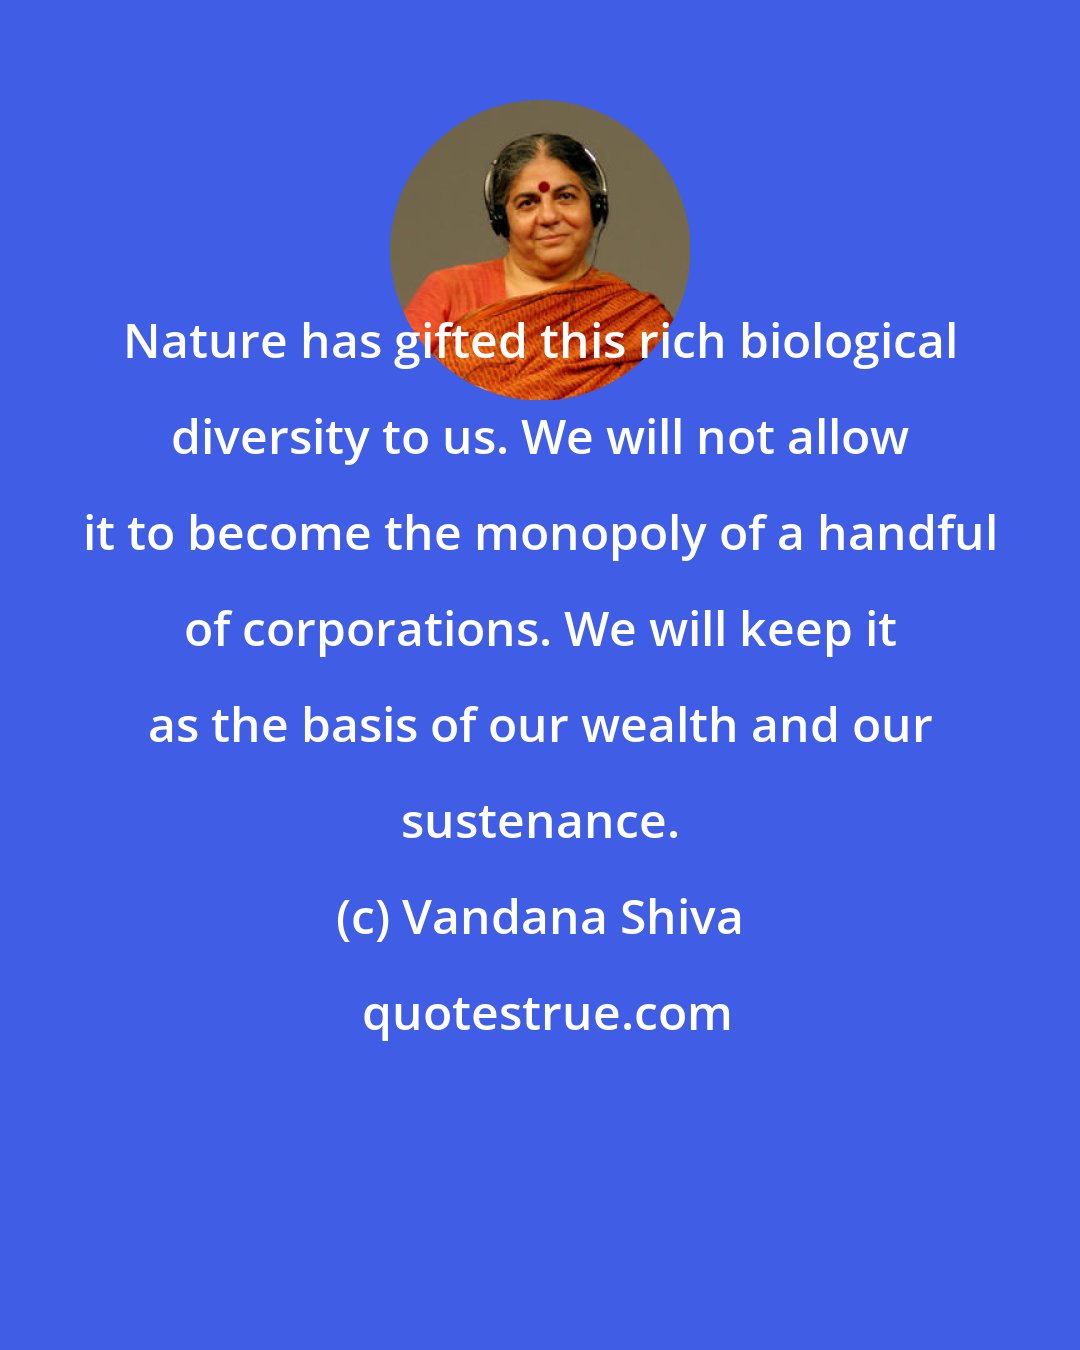 Vandana Shiva: Nature has gifted this rich biological diversity to us. We will not allow it to become the monopoly of a handful of corporations. We will keep it as the basis of our wealth and our sustenance.